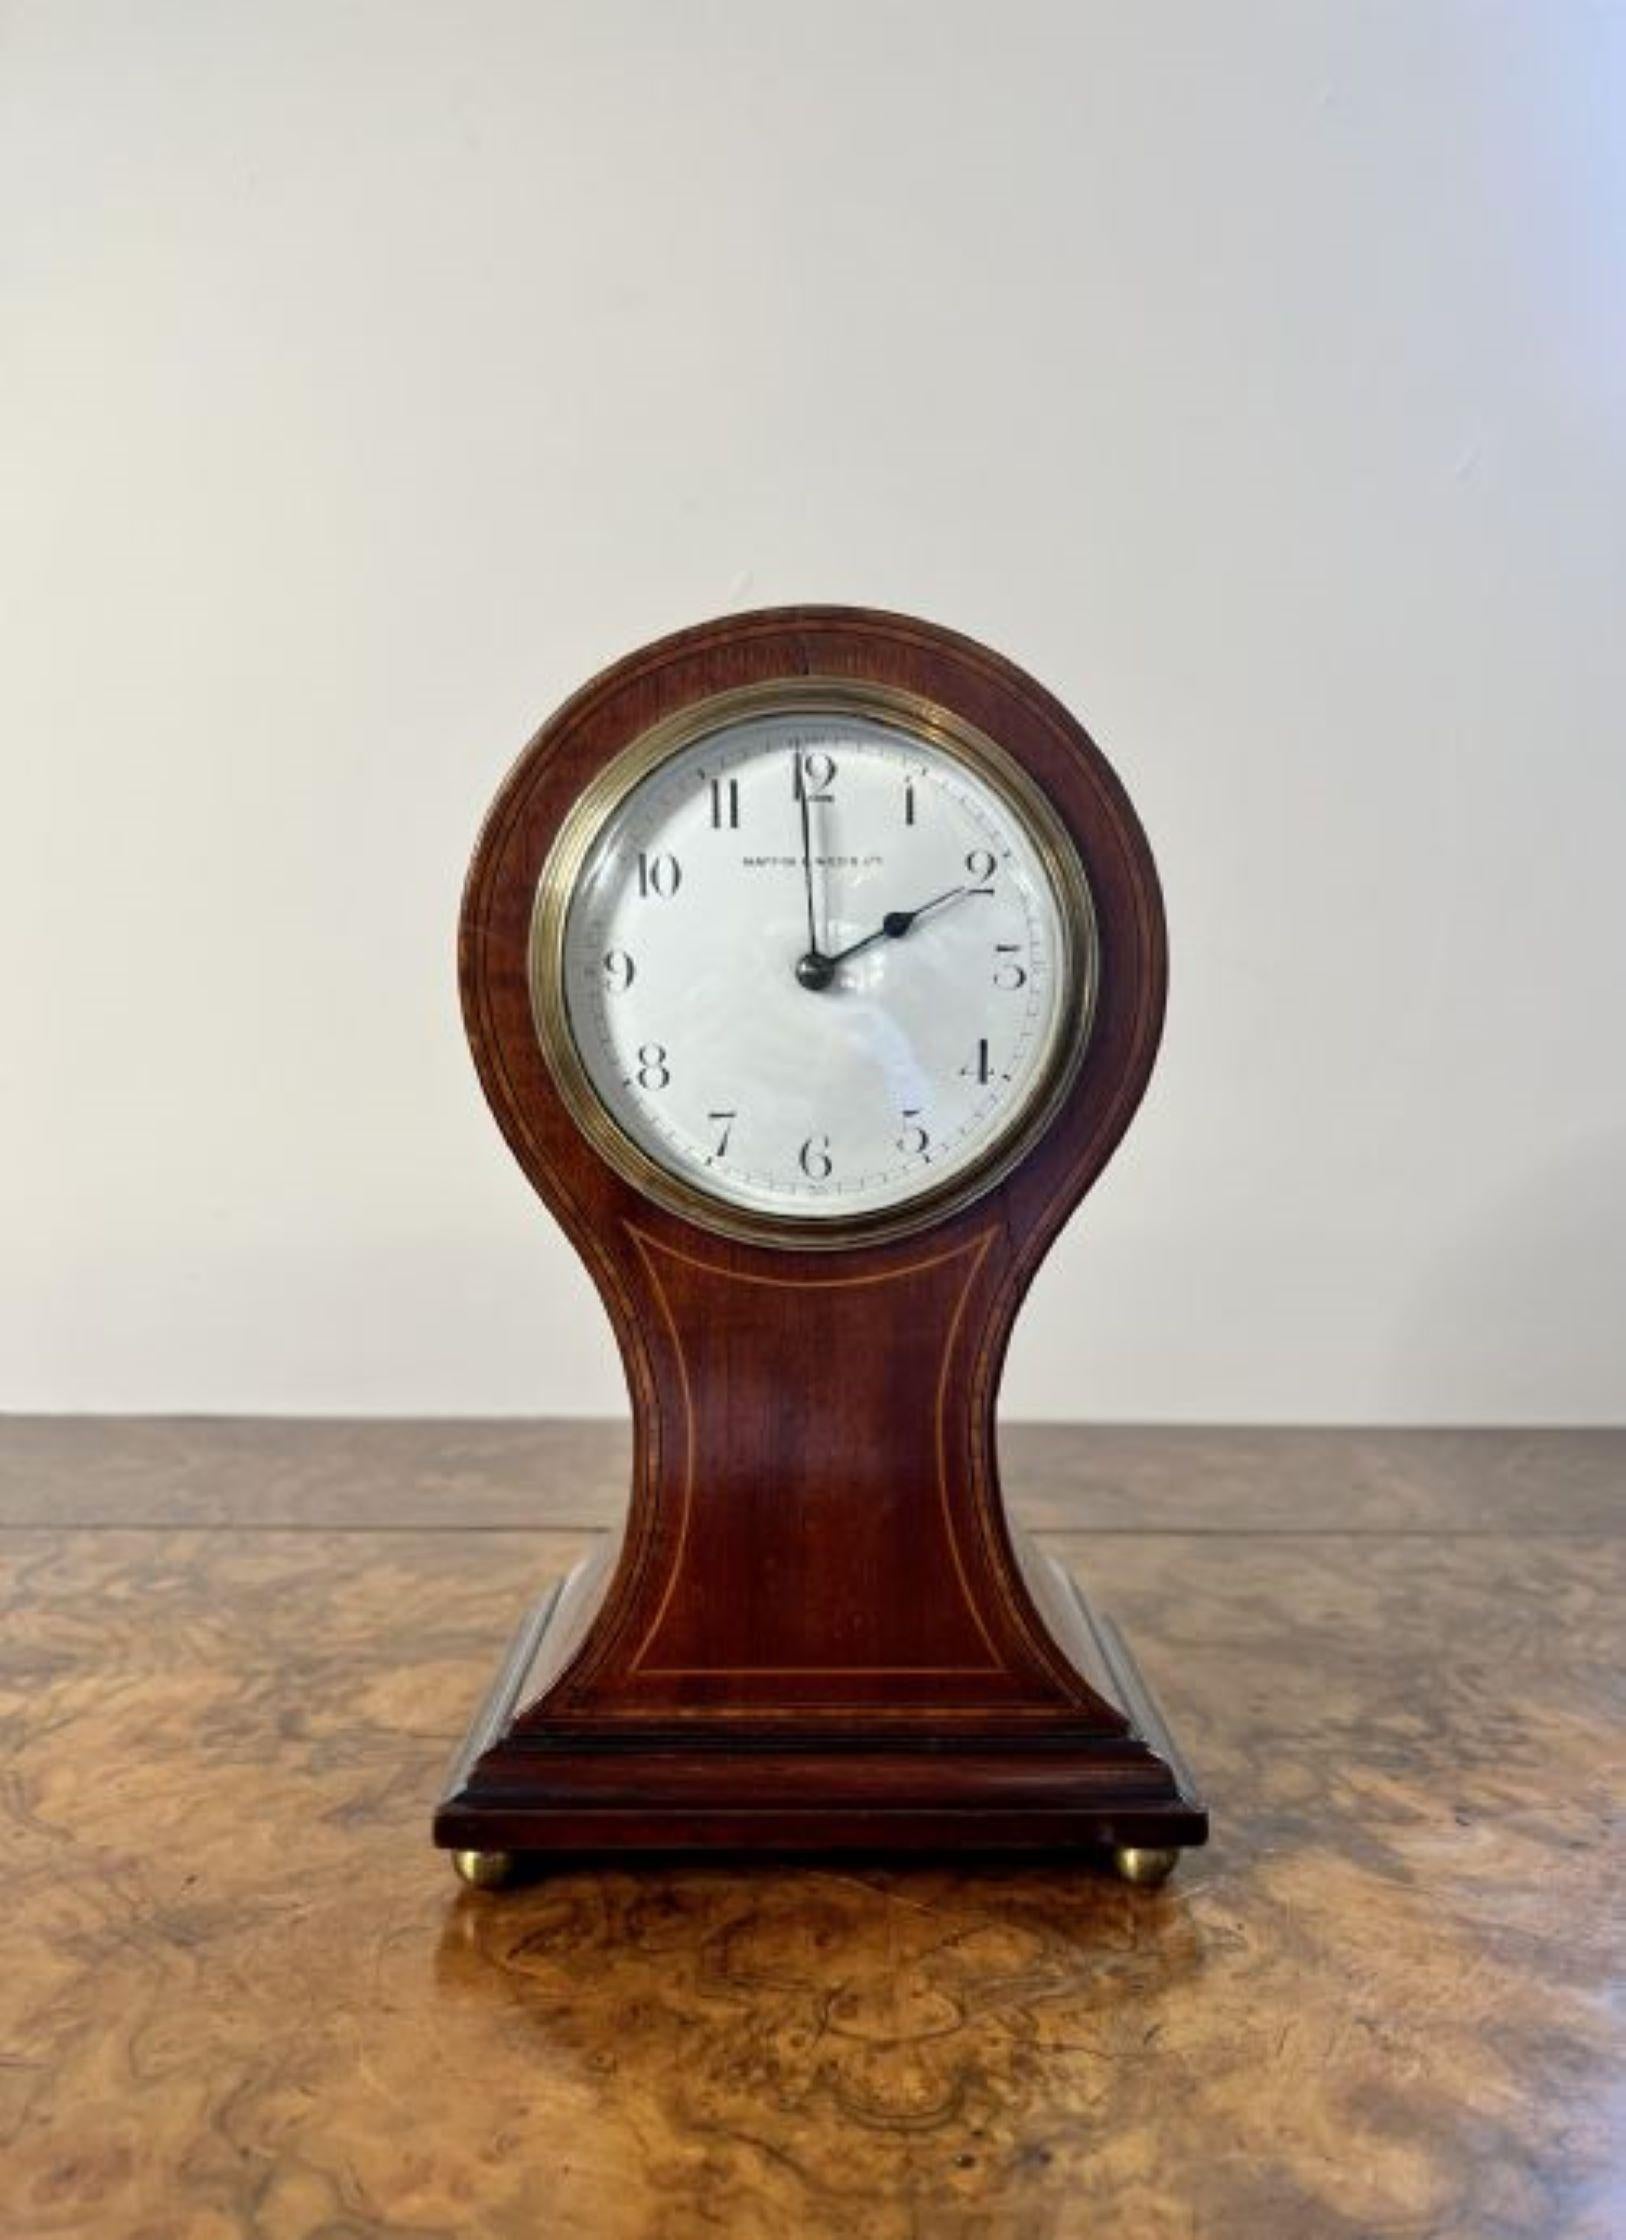 Stunning antique Edwardian inlaid mahogany balloon shaped mantle clock by Mappin & Webb, having a quality mahogany inlaid case, with a white enamel dial raised on four bun feet.
Please note all of our clocks are serviced prior to delivery we do